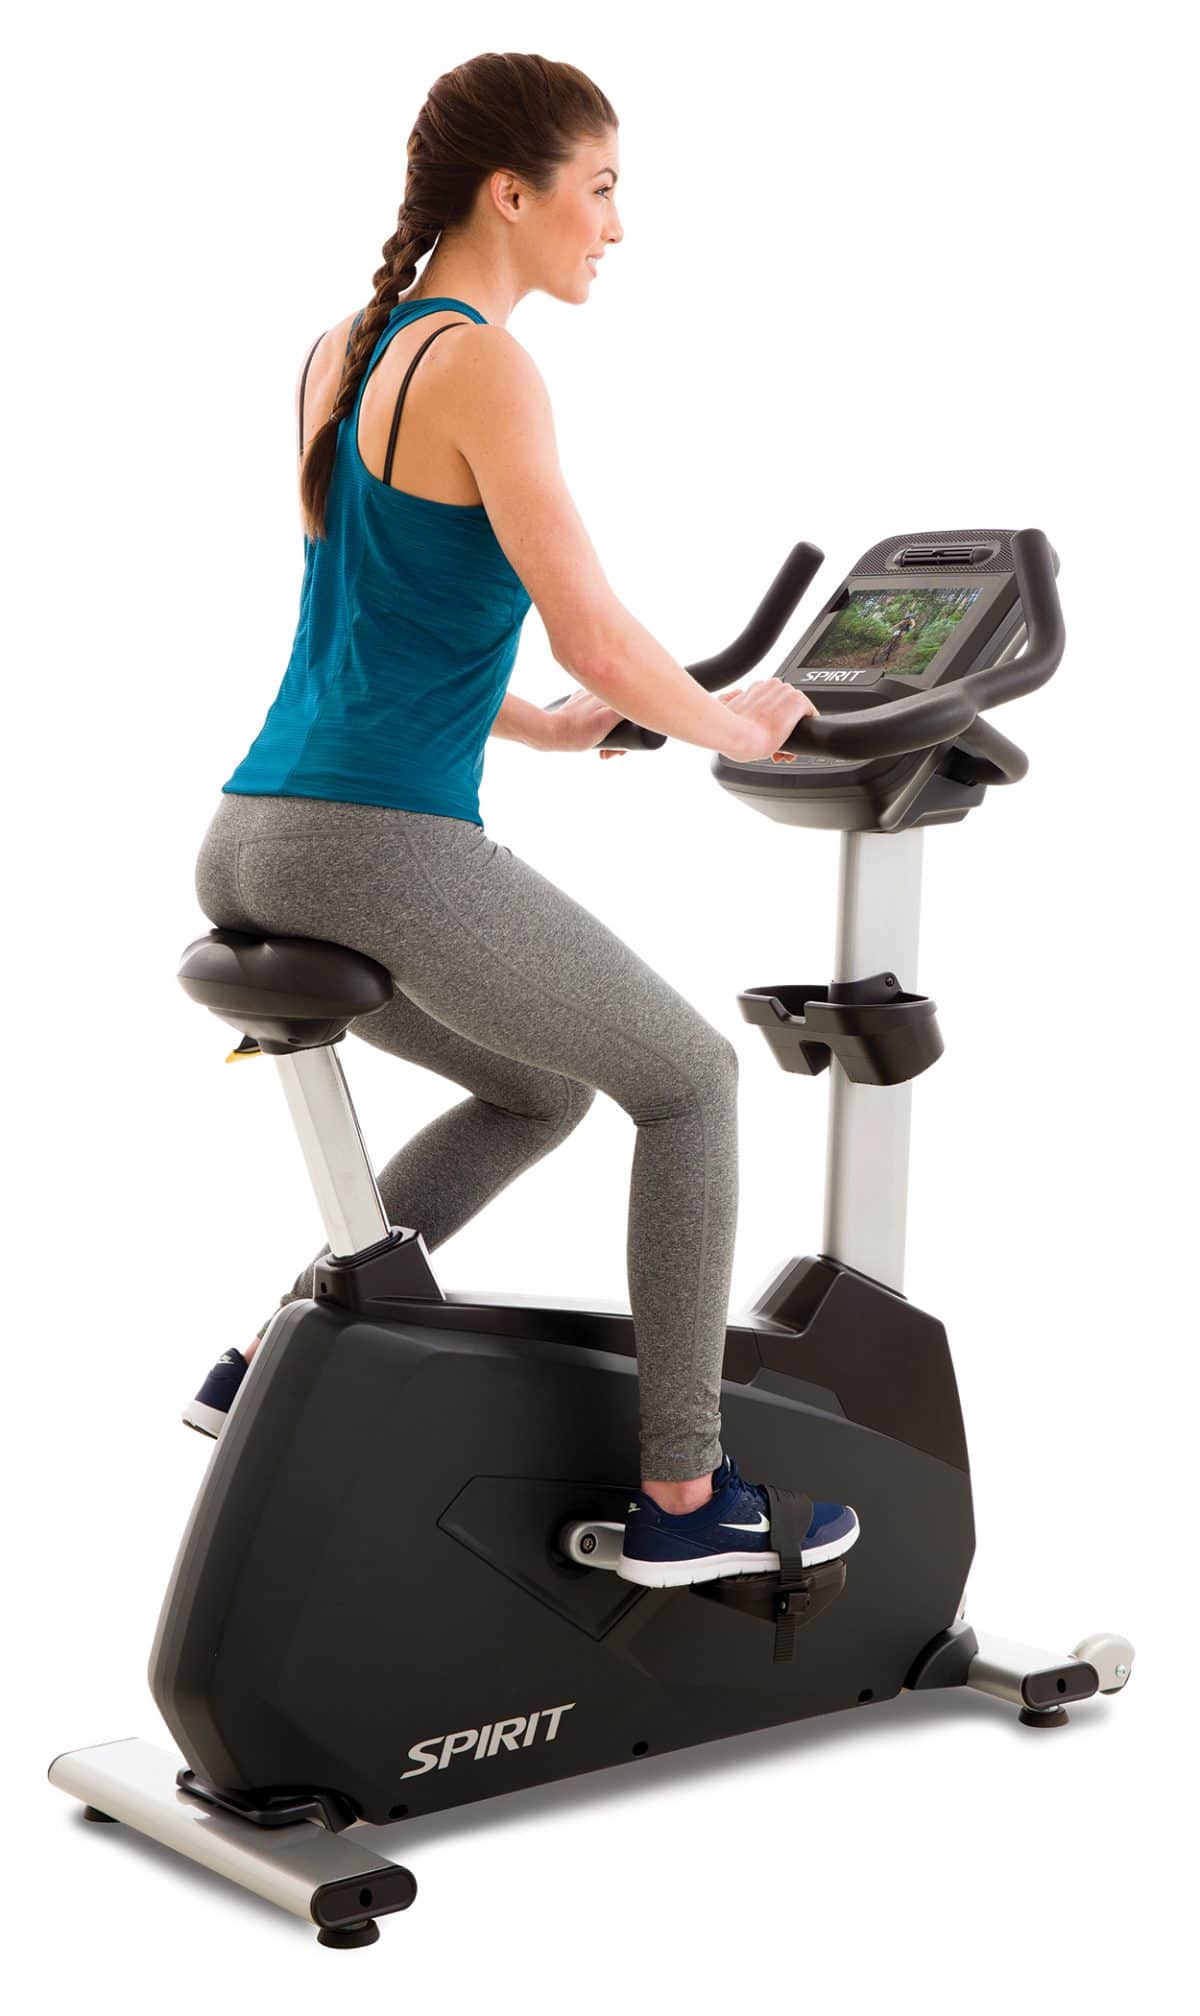 A woman riding an exercise bike on a white background.